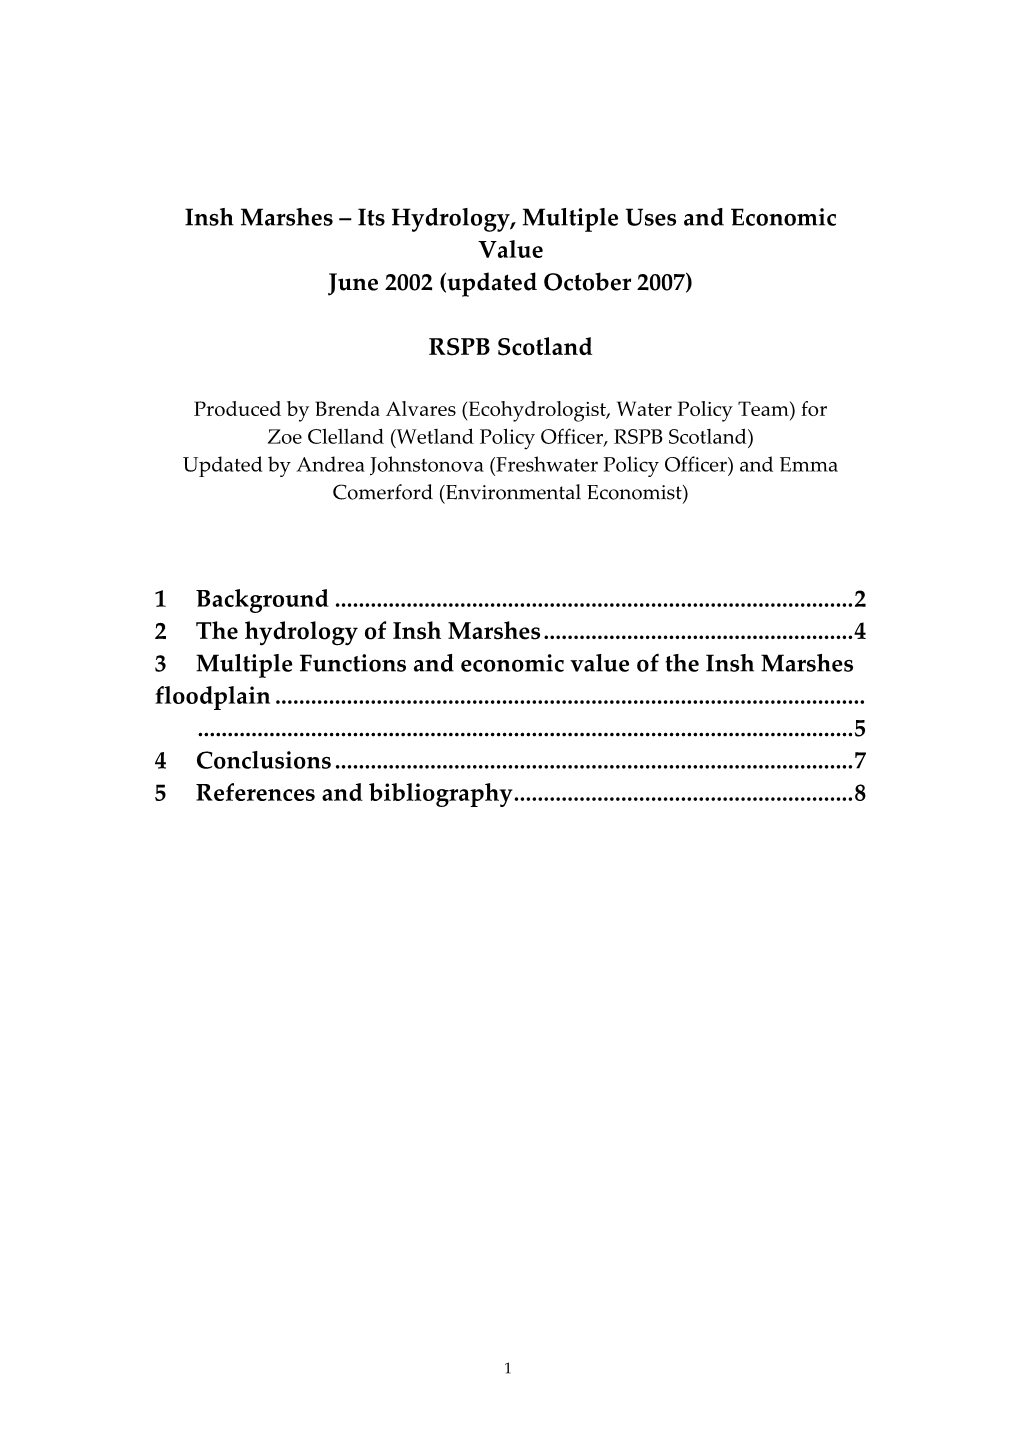 Insh Marshes – Its Hydrology, Multiple Uses and Economic Value June 2002 (Updated October 2007)